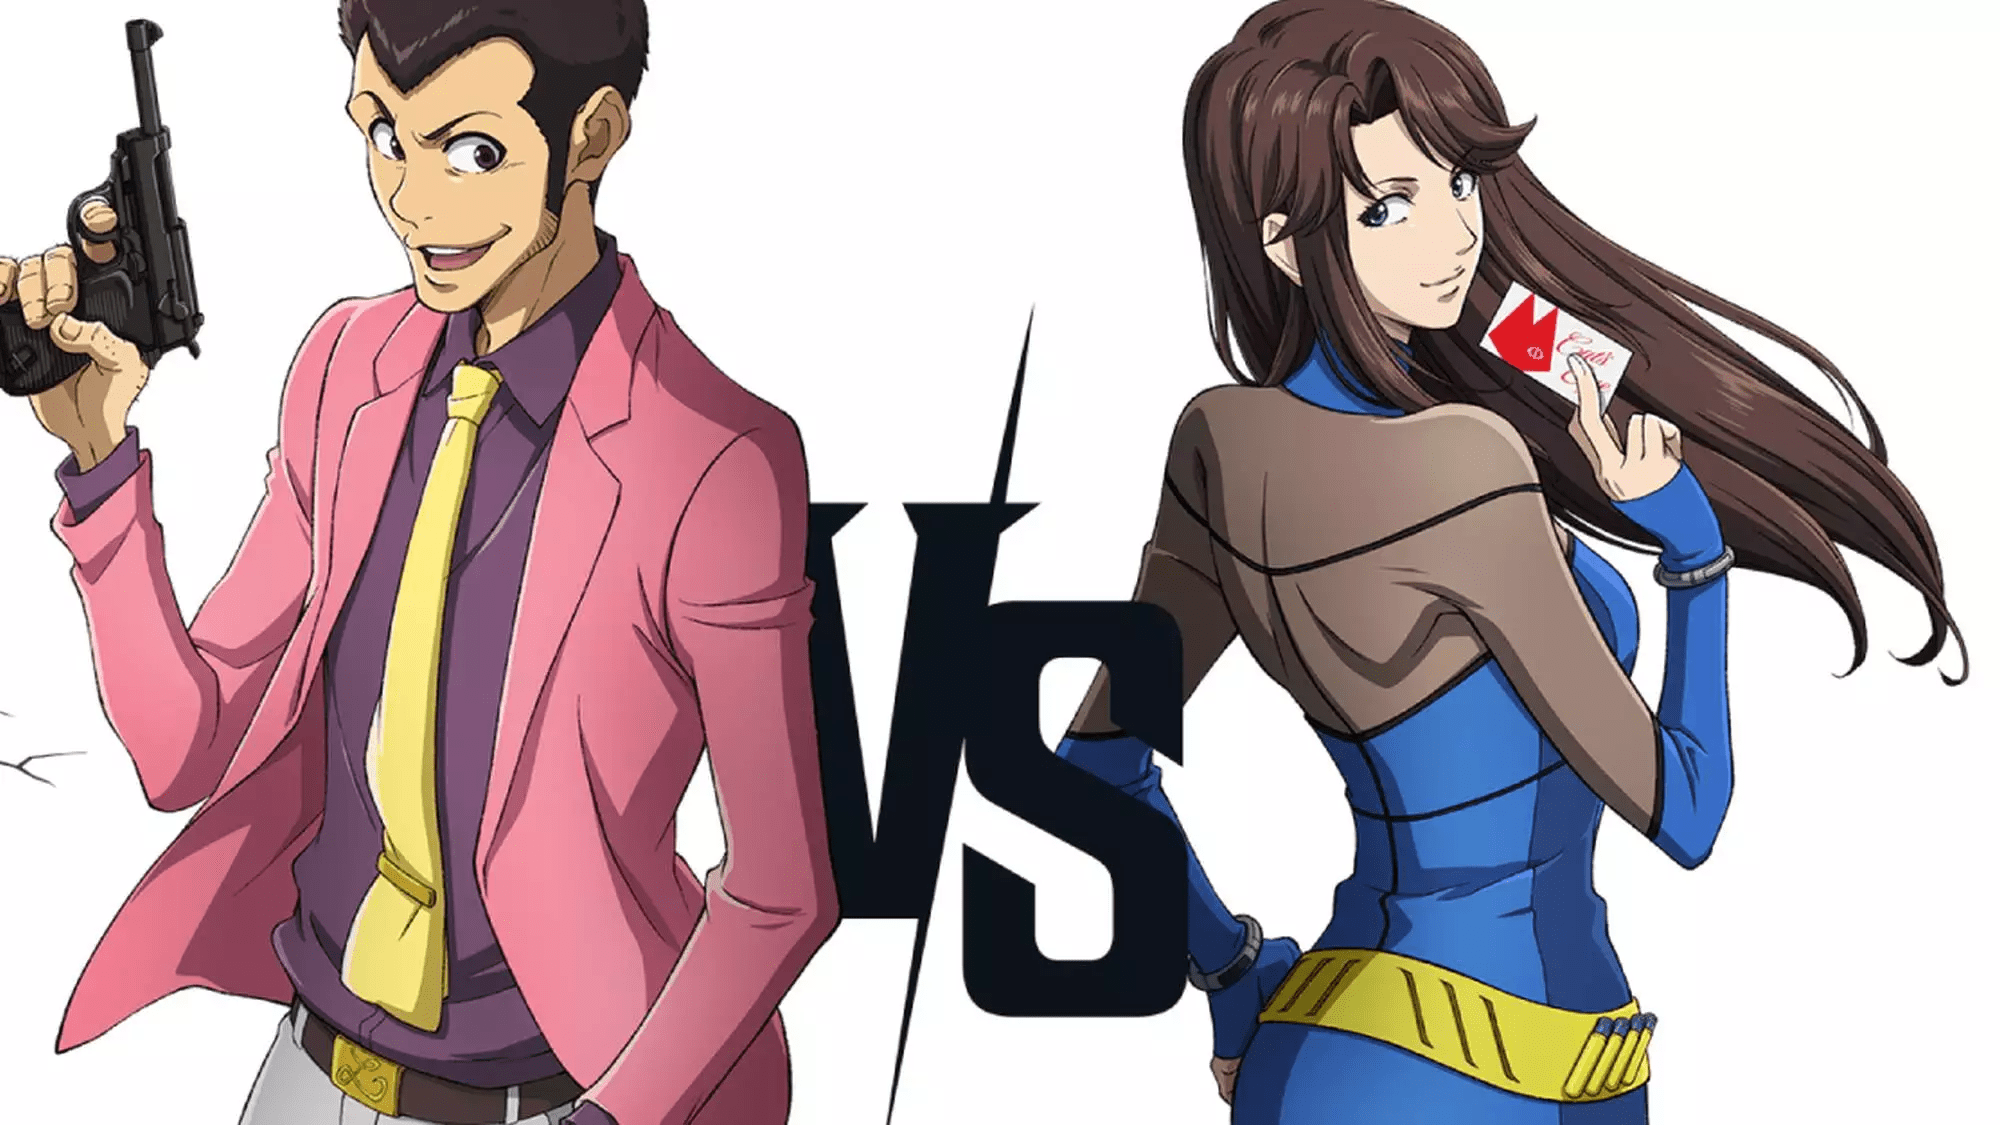 Lupin III, Cat’s Eye, and More Anime Thieves with Hearts of Gold